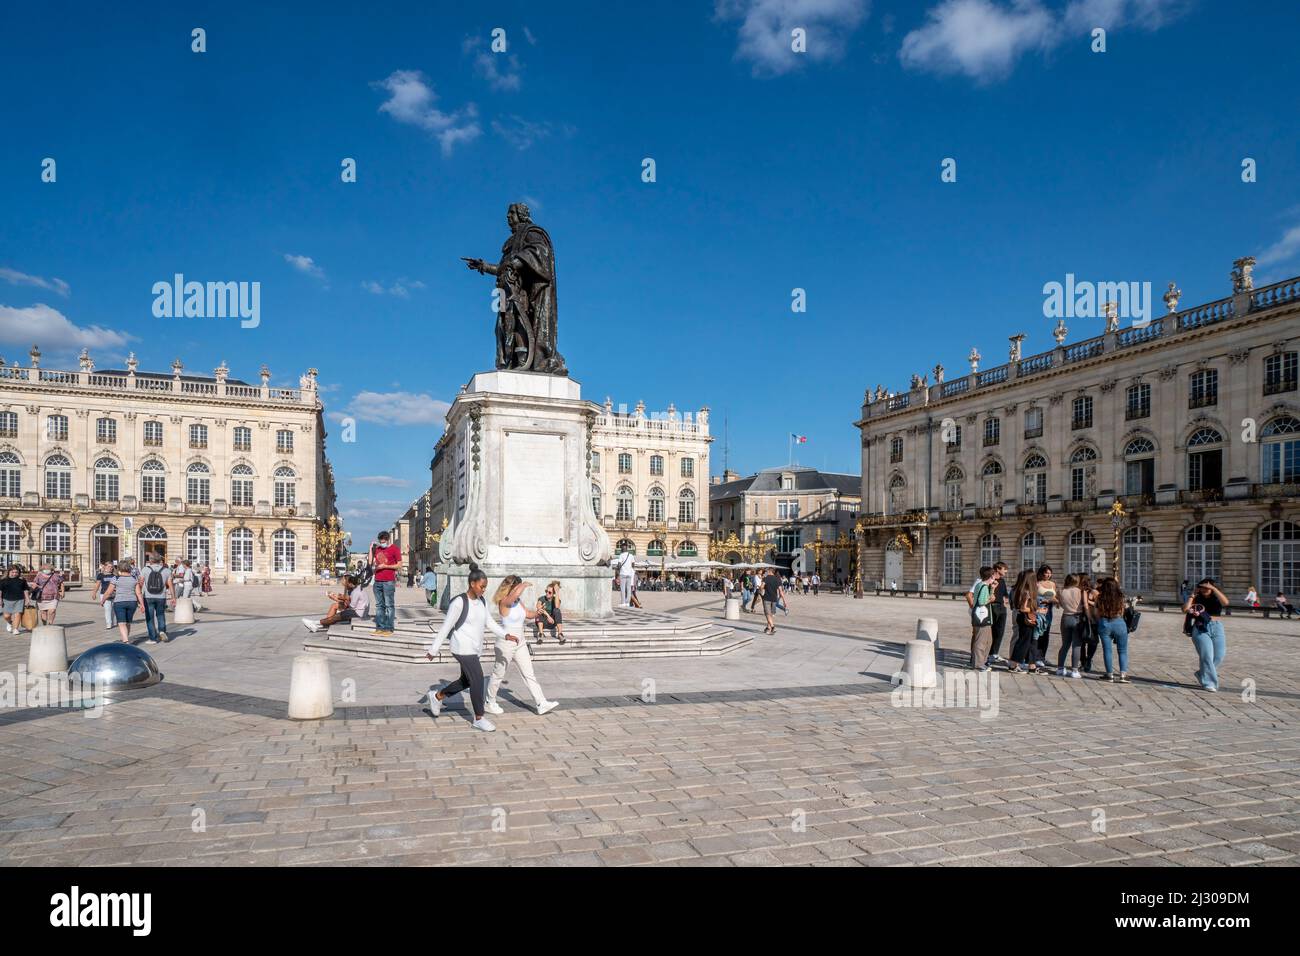 Statue Stanislas I. Leszcynski in front of Hotel de Ville Grand Hotel and Opera House on Place Stanislas, Unesco World Heritage Site, Nancy, Lorraine, France, Europe Stock Photo